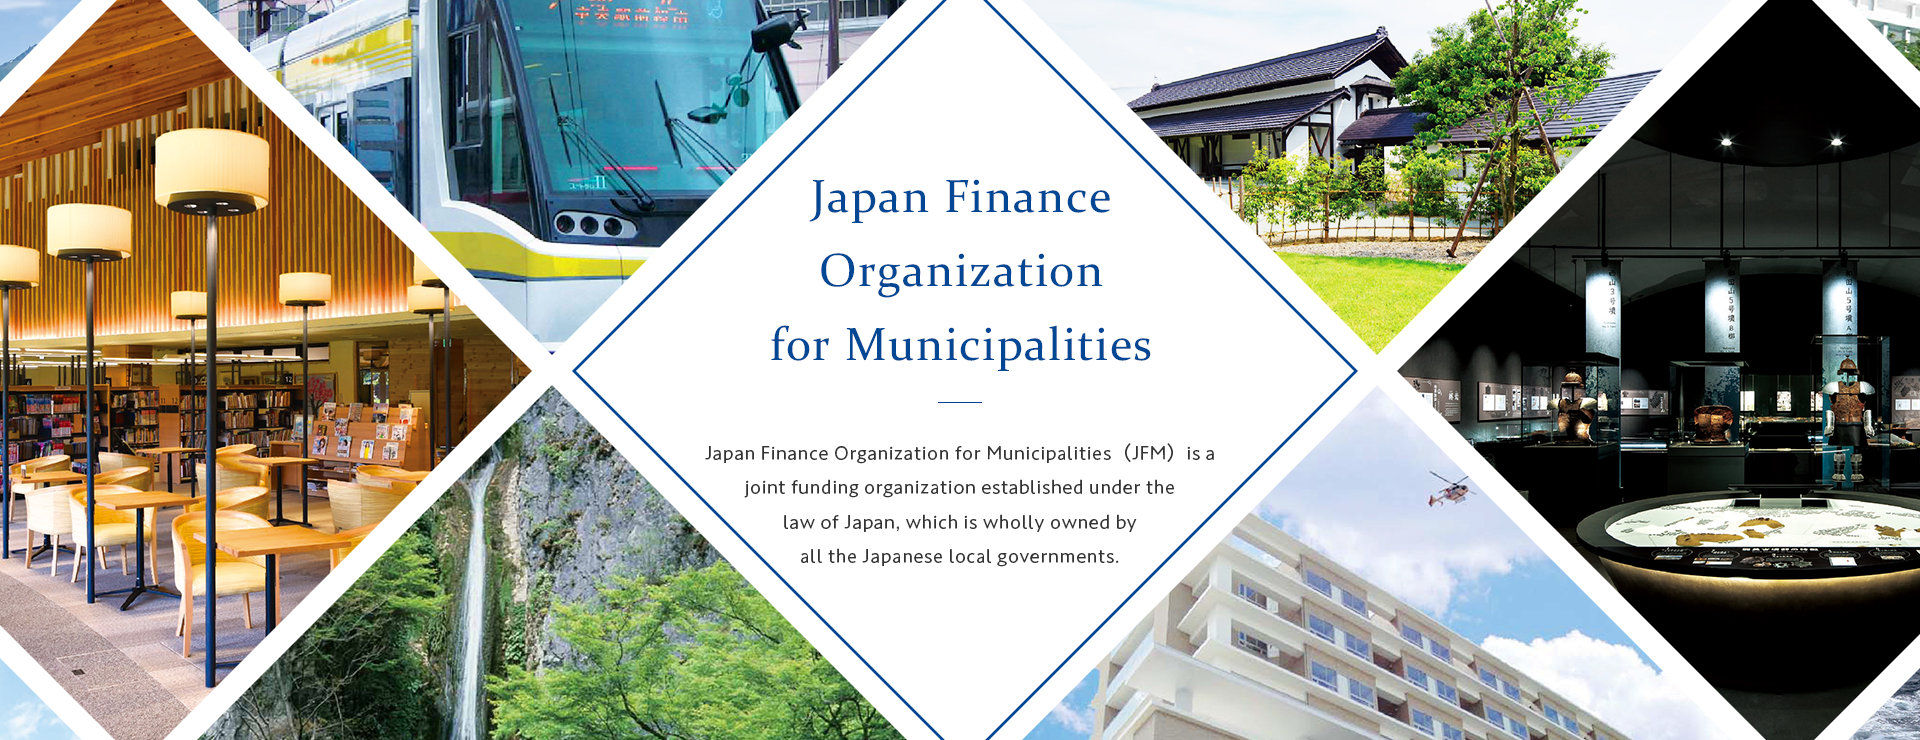 Japan Finance Organization for Municipalities Japan Finance Organization for Municipalities（JFM）is a joint funding organization established under the law of Japan, which is wholly owned by all the Japanese local governments.